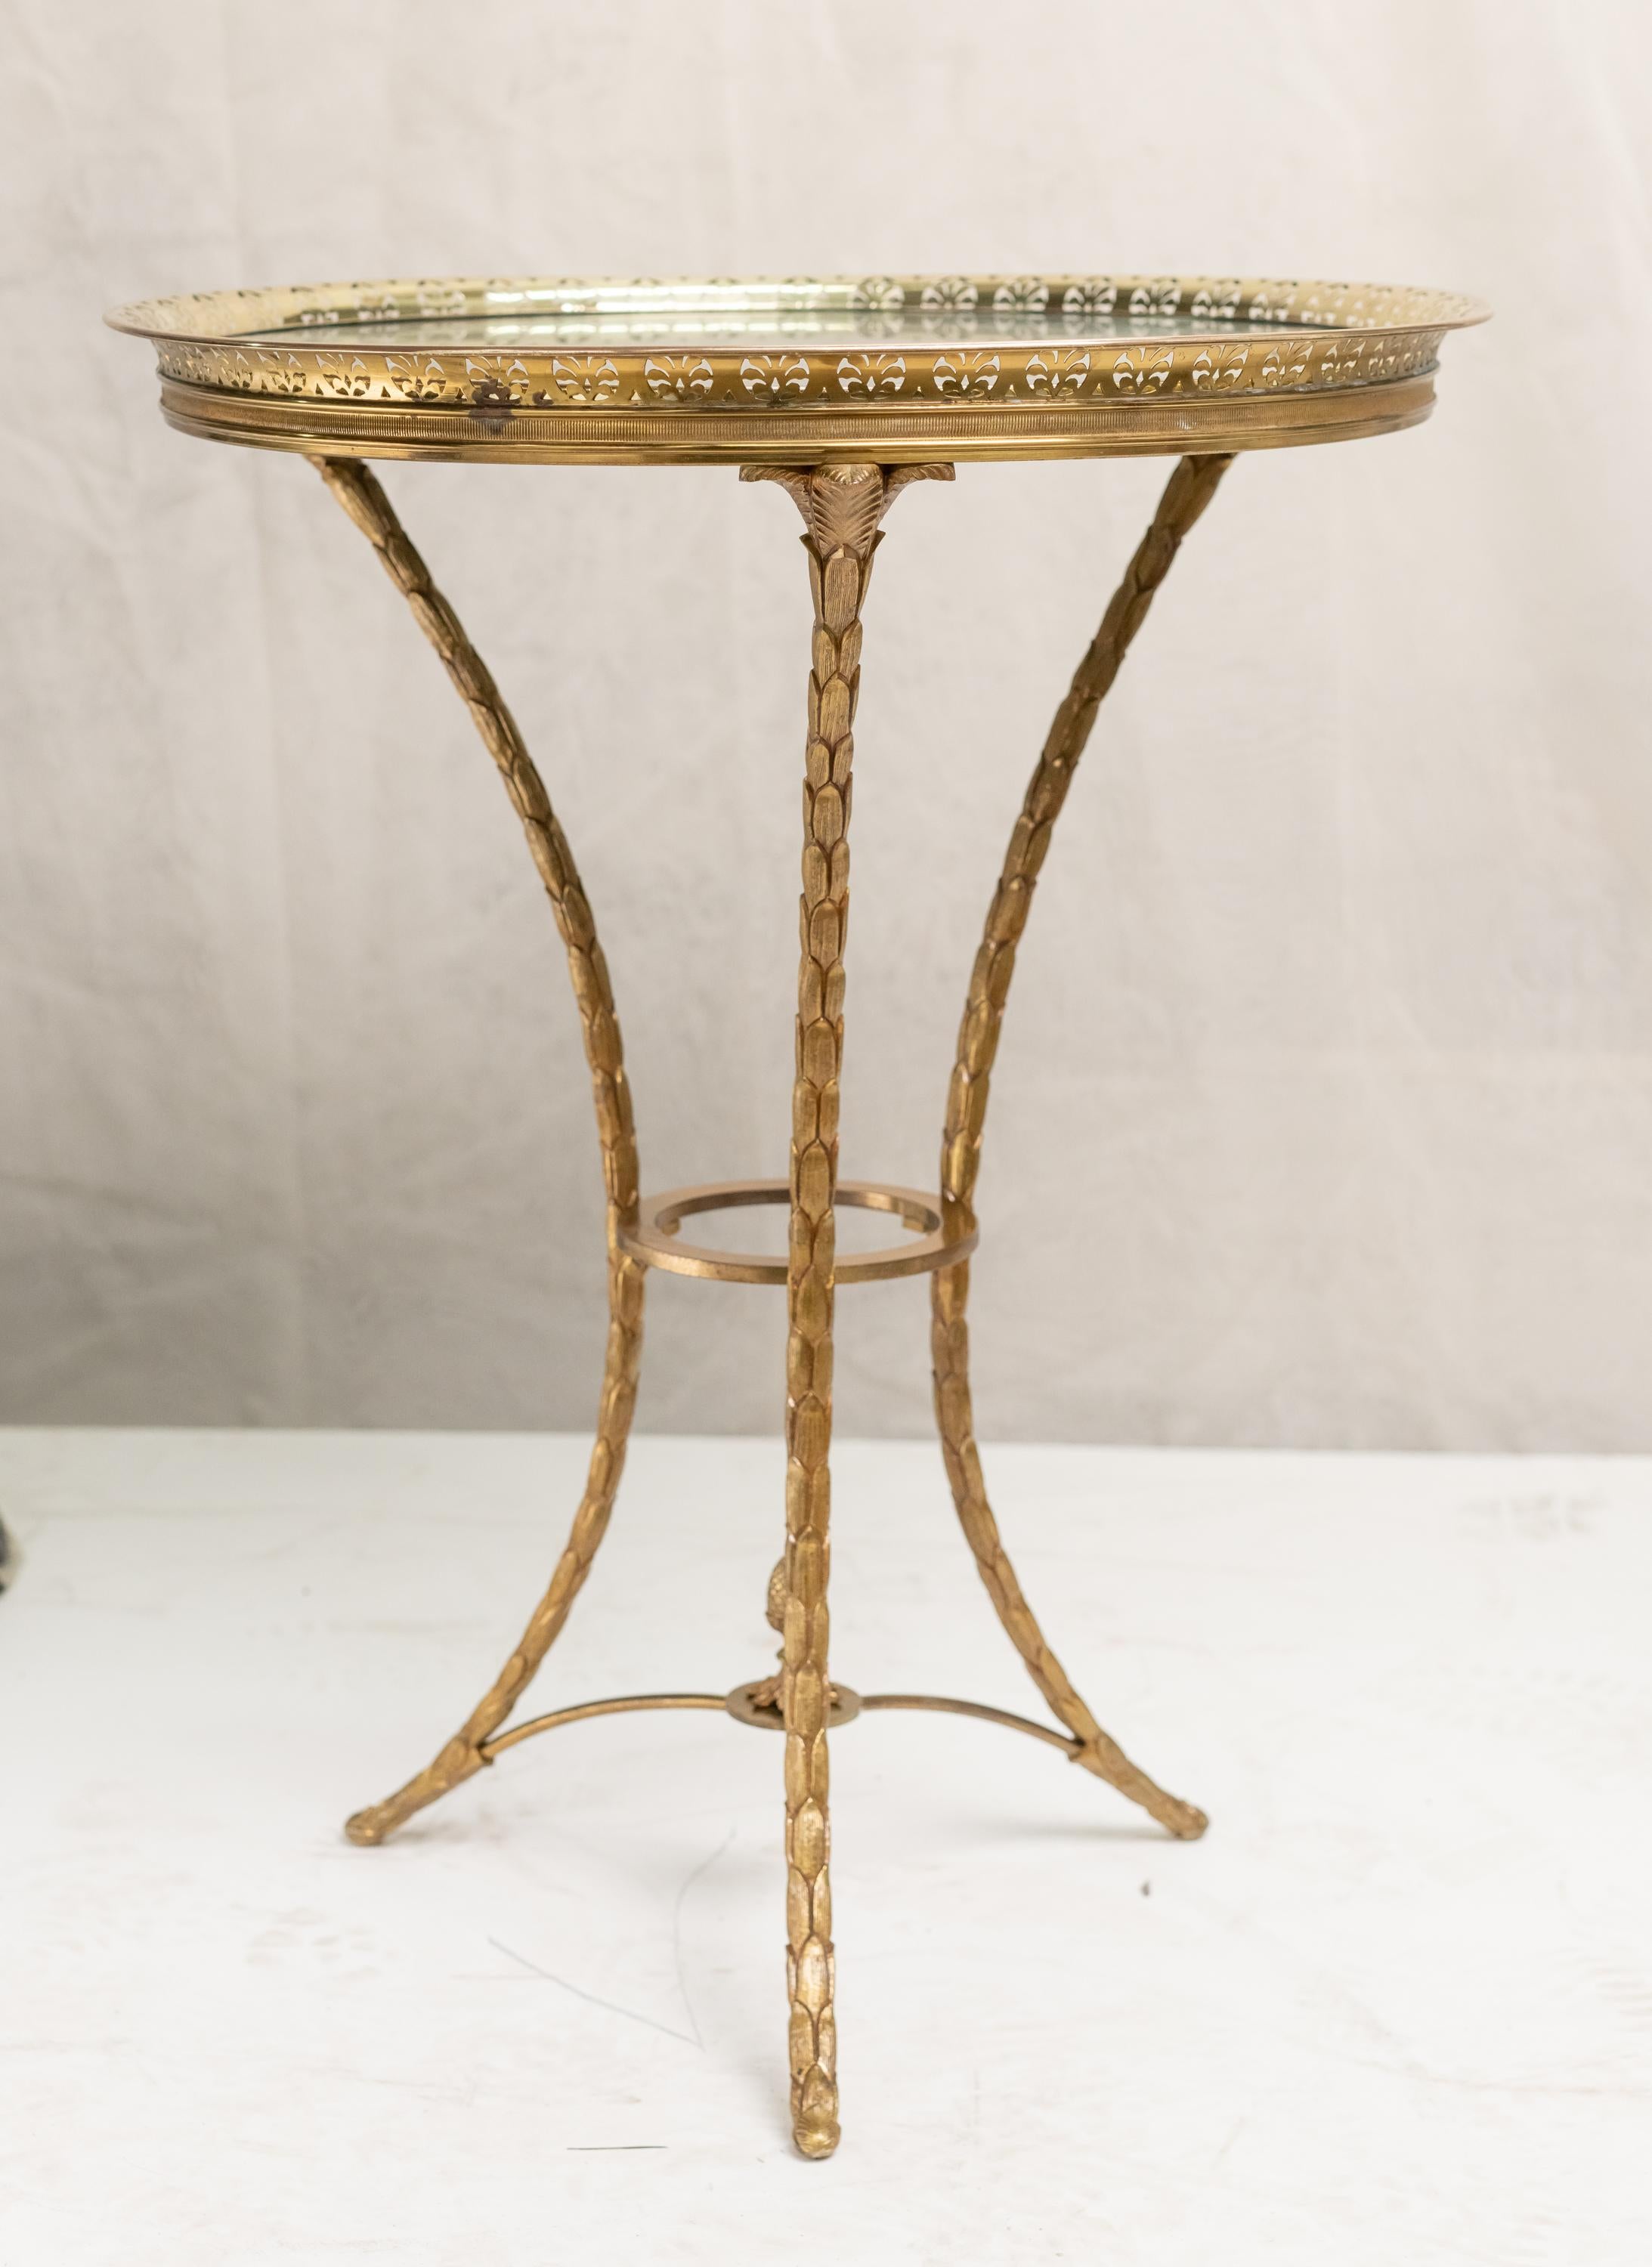 Rare fine quality gilded bronze guéridon by Maison Baguès with palm motif tripod base the gallery top fitted with 